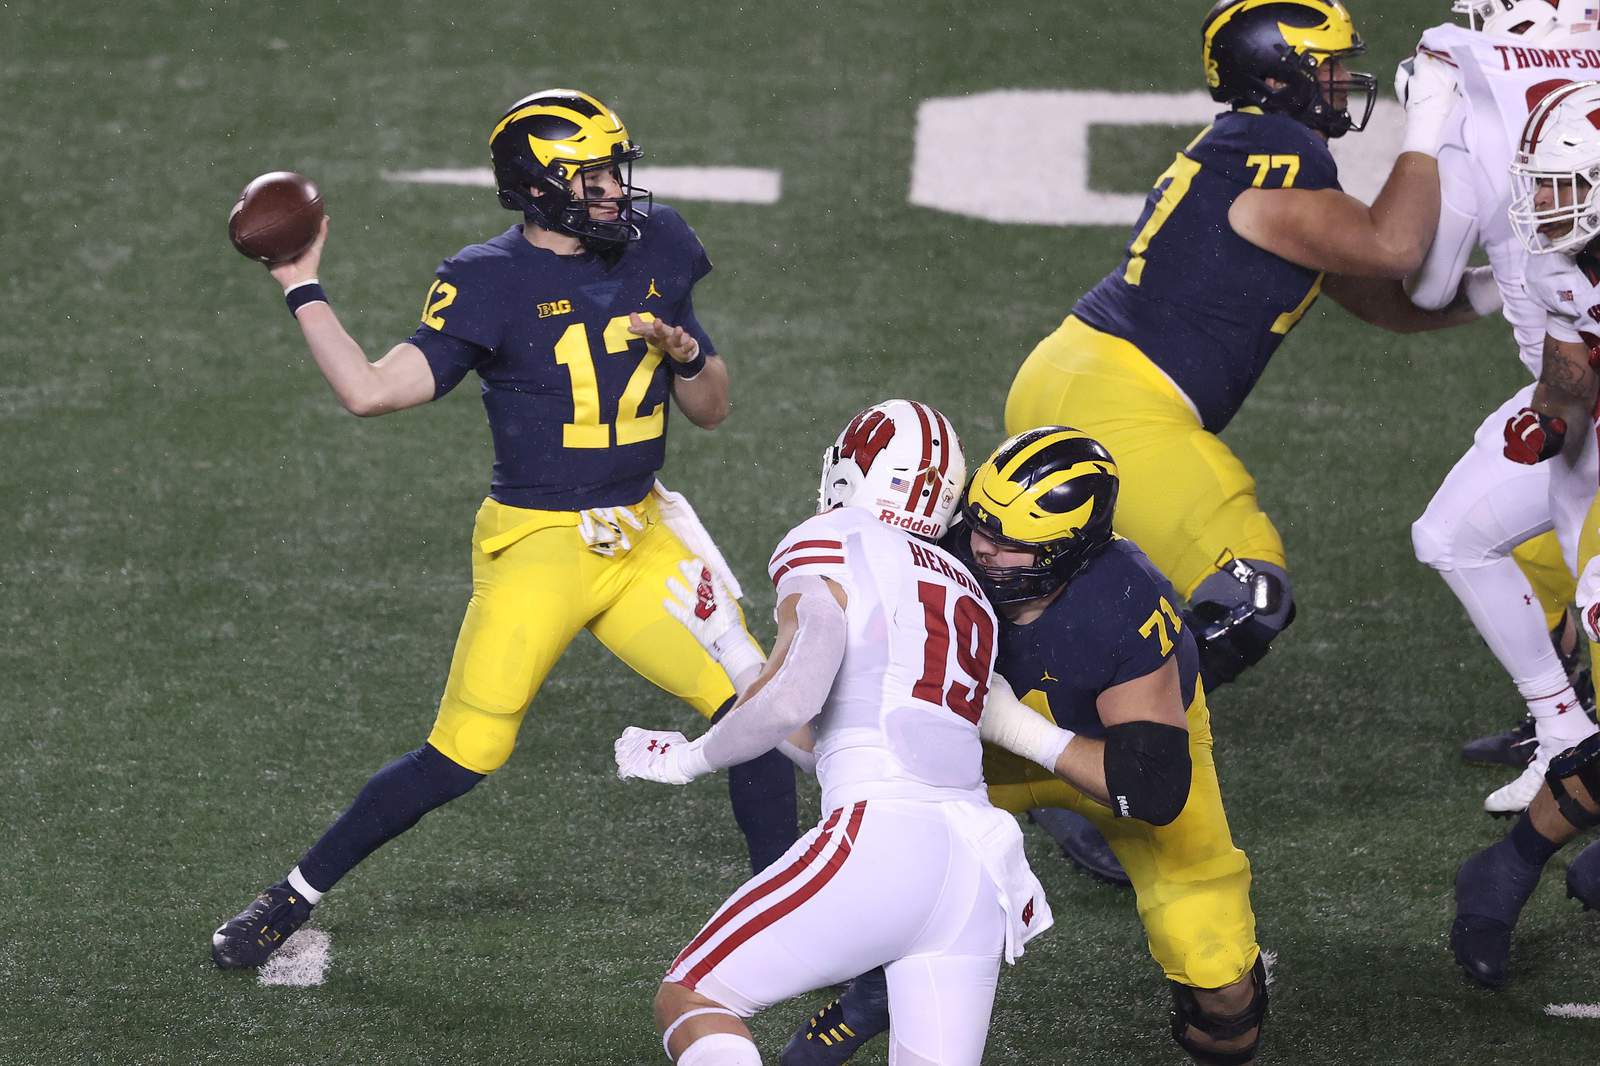 Michigan football’s upcoming schedule offers one final chance to move past ugly losing streak